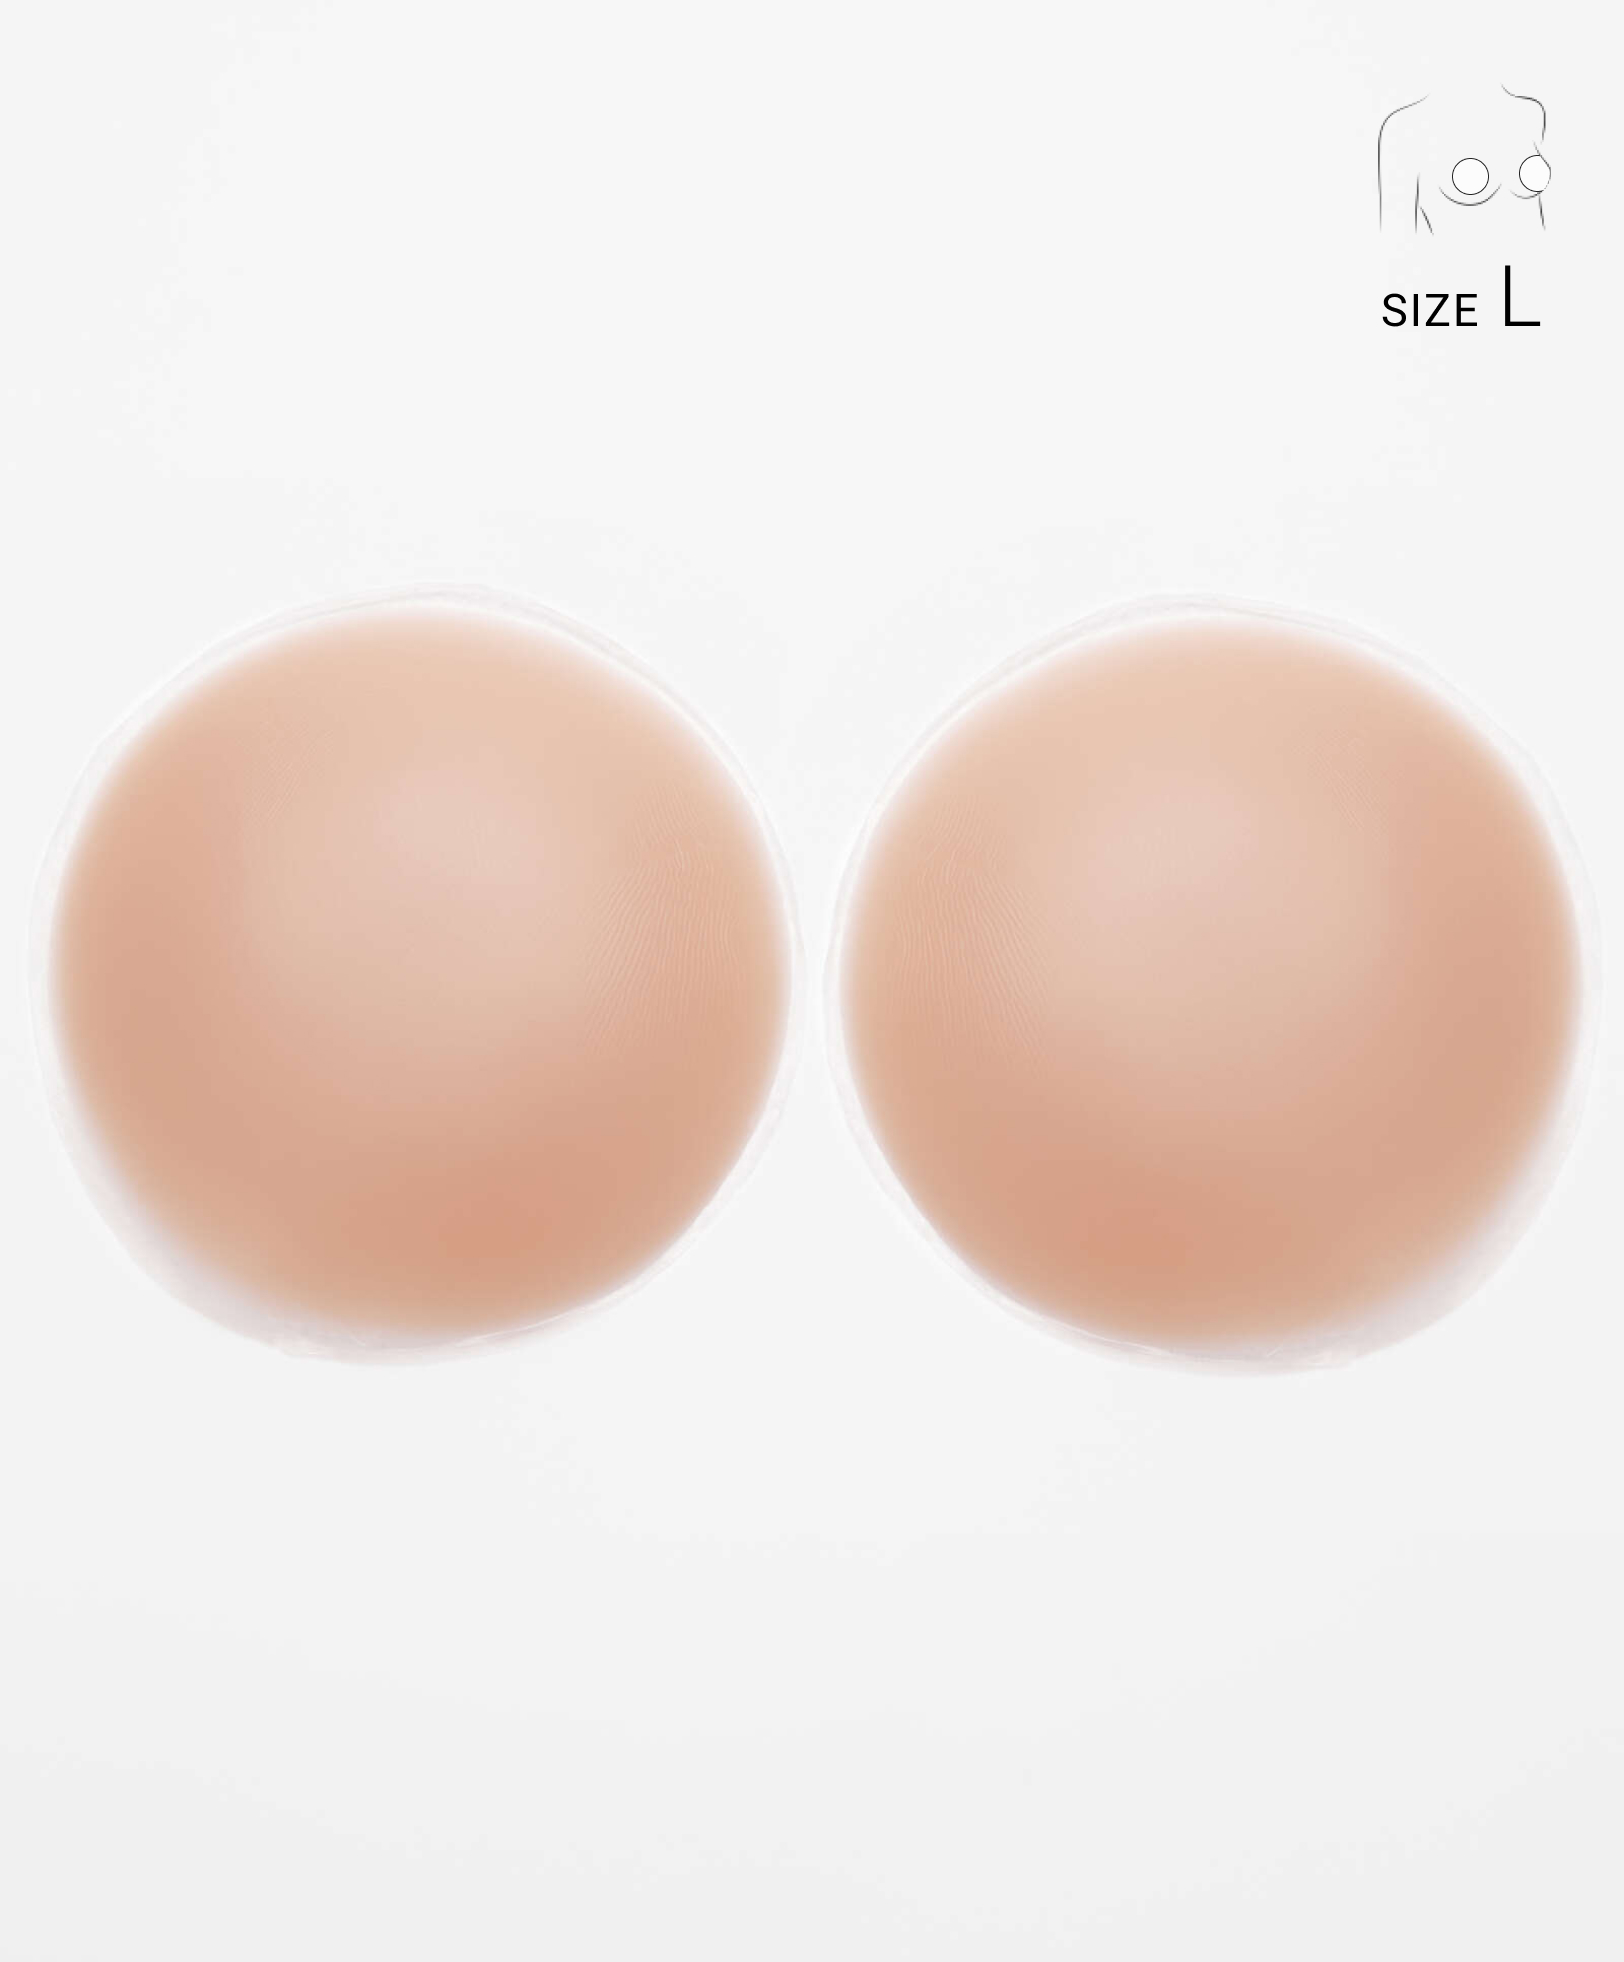 Large adhesive silicone nipple covers